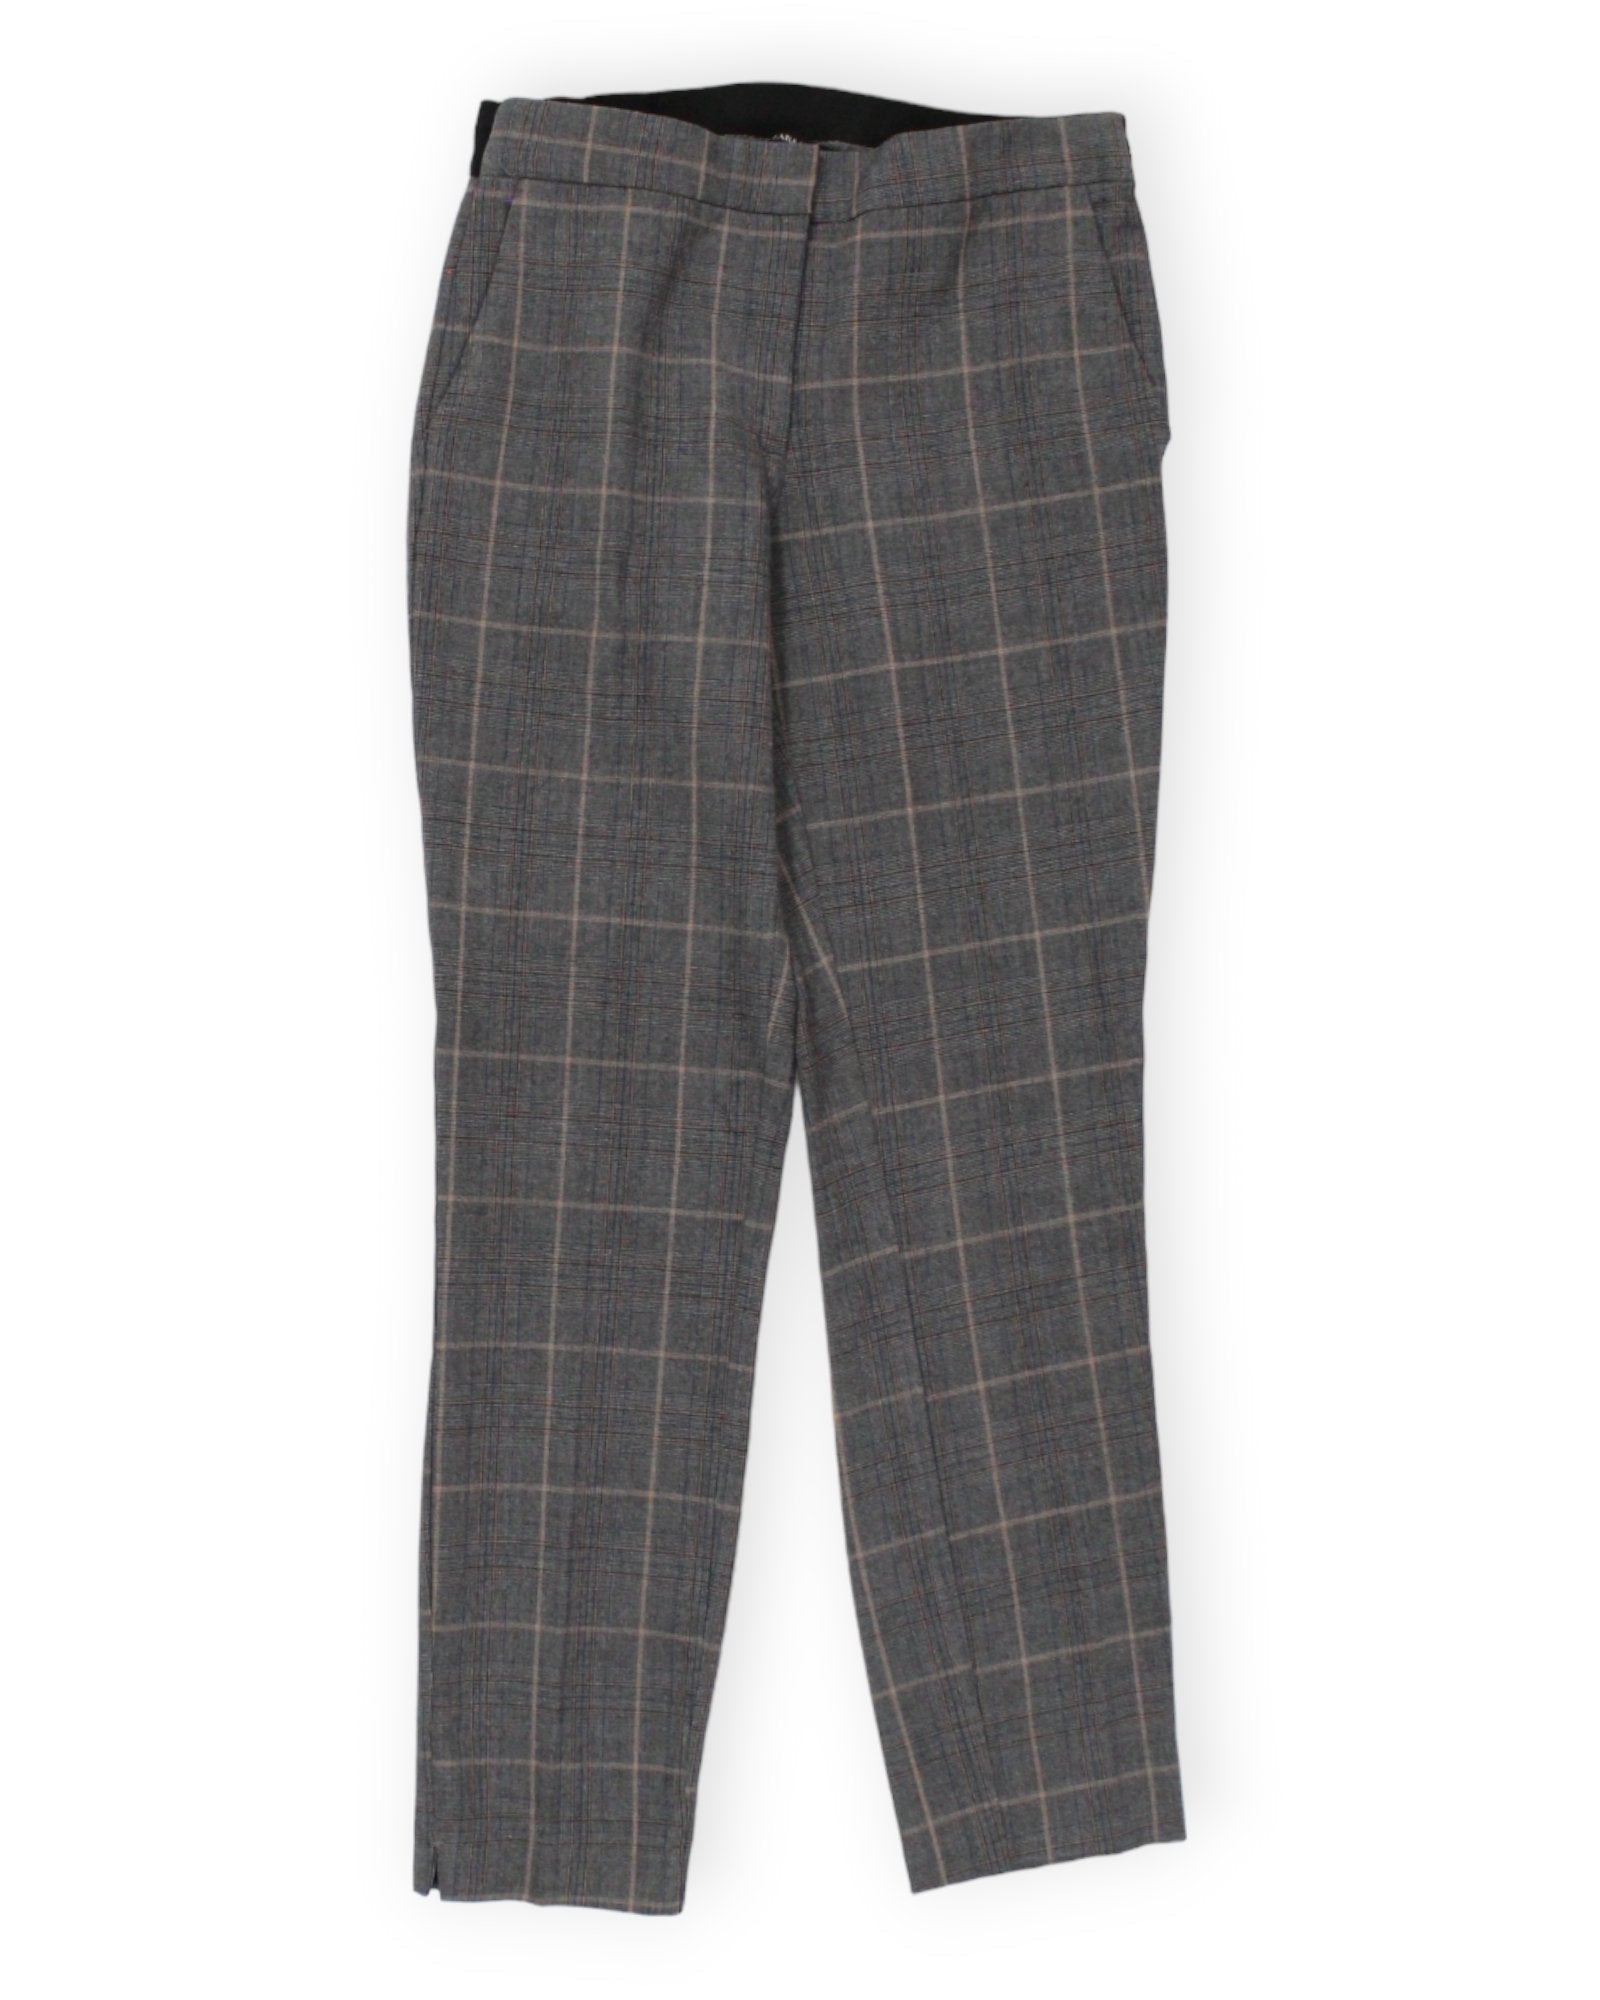 Heartbreak tailored pants in green check (part of a set) | ASOS